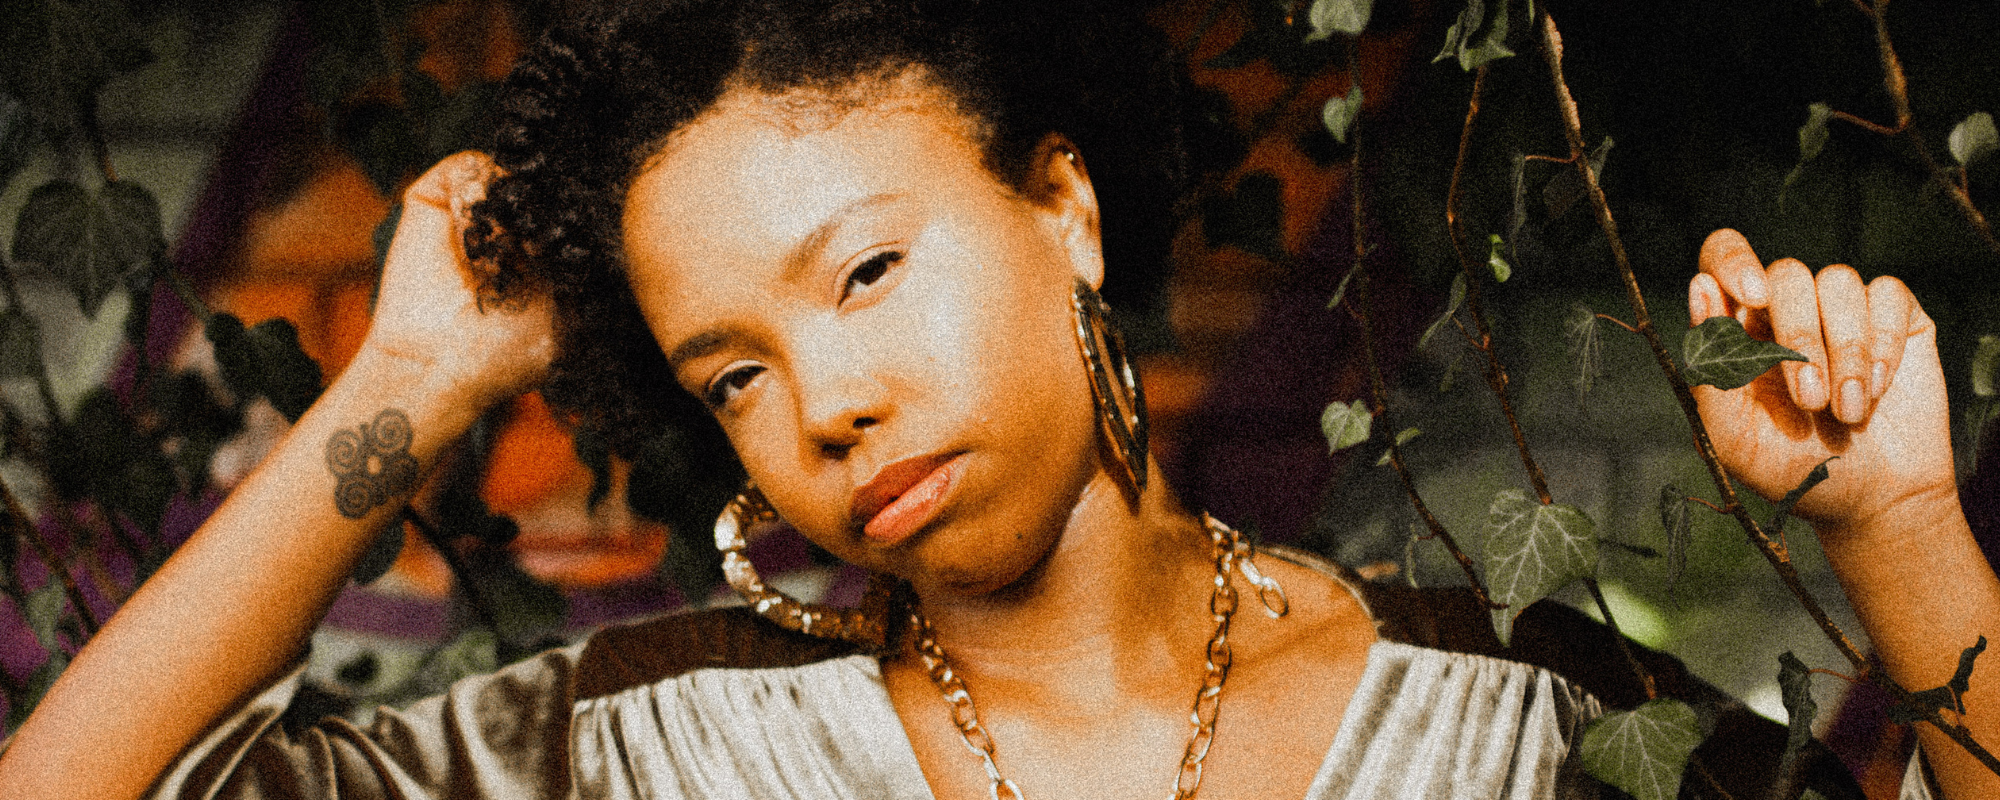 KIANJA Stuns with “Ever Since You Went Away” [Exclusive Premiere]